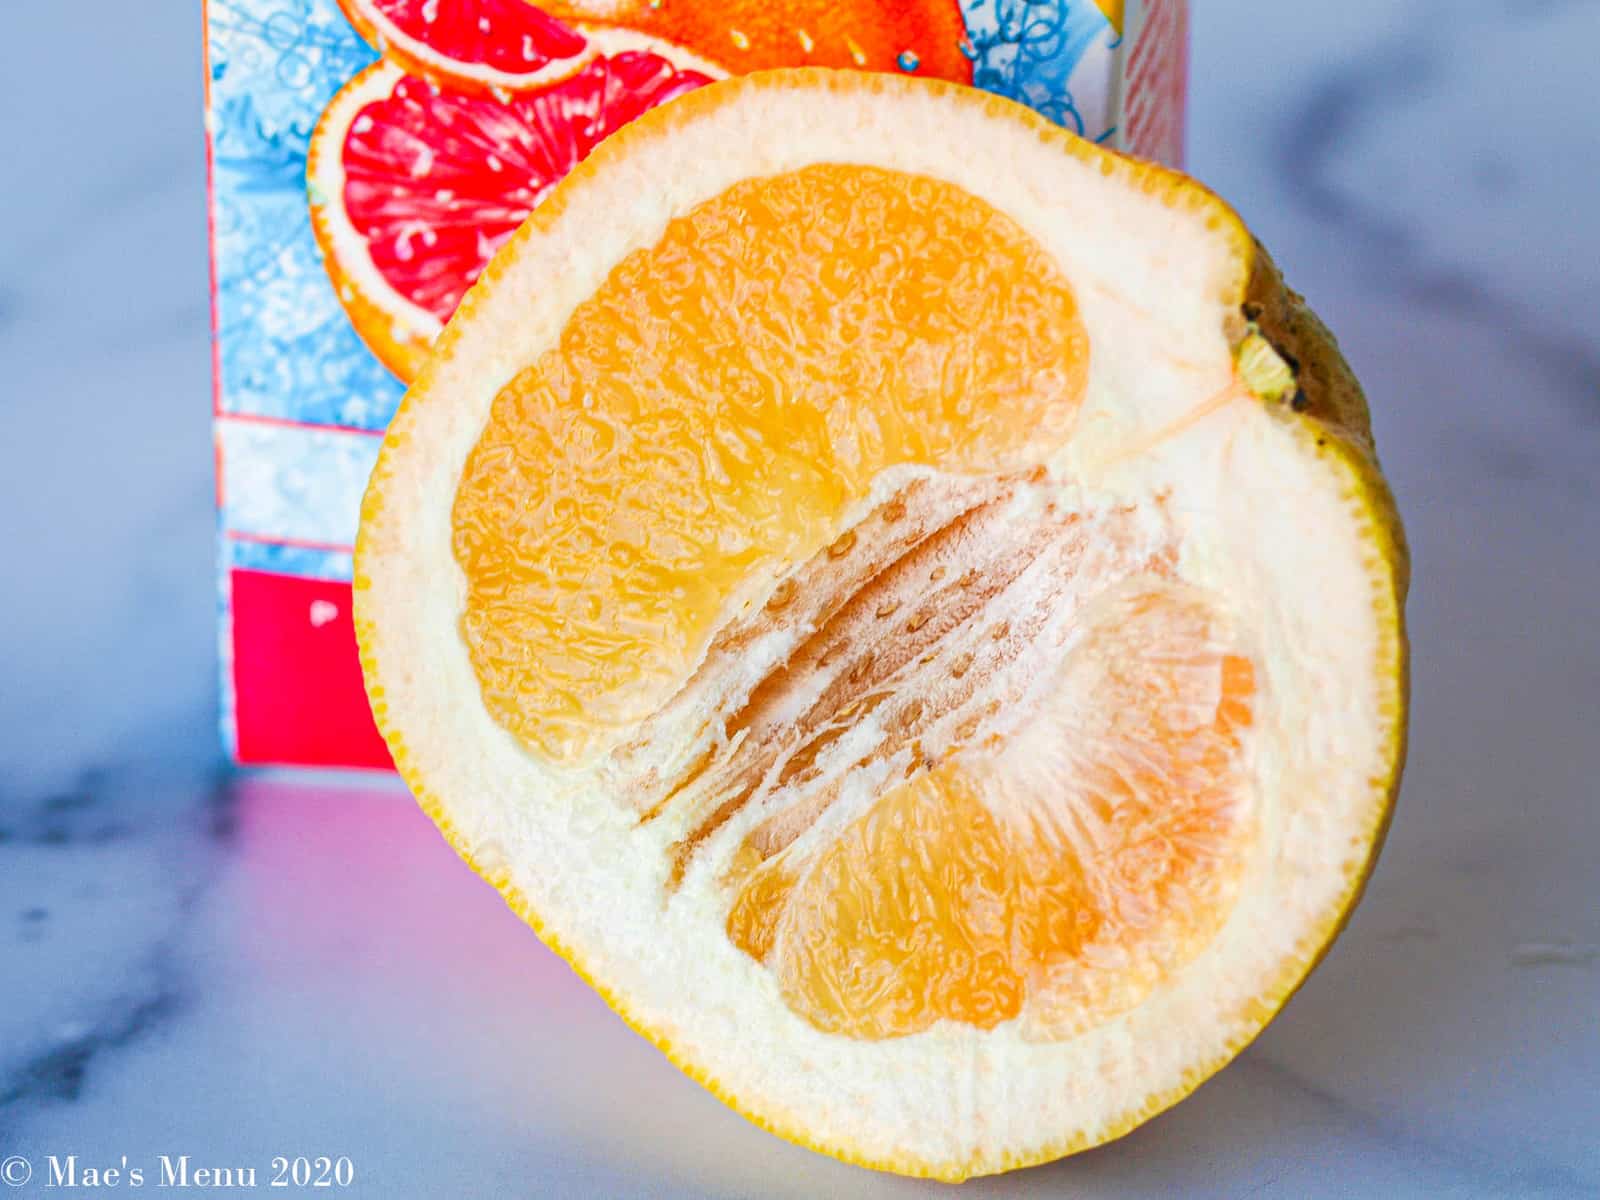 half a grapefruit sitting on its side in front of a carton of grapefruit juice